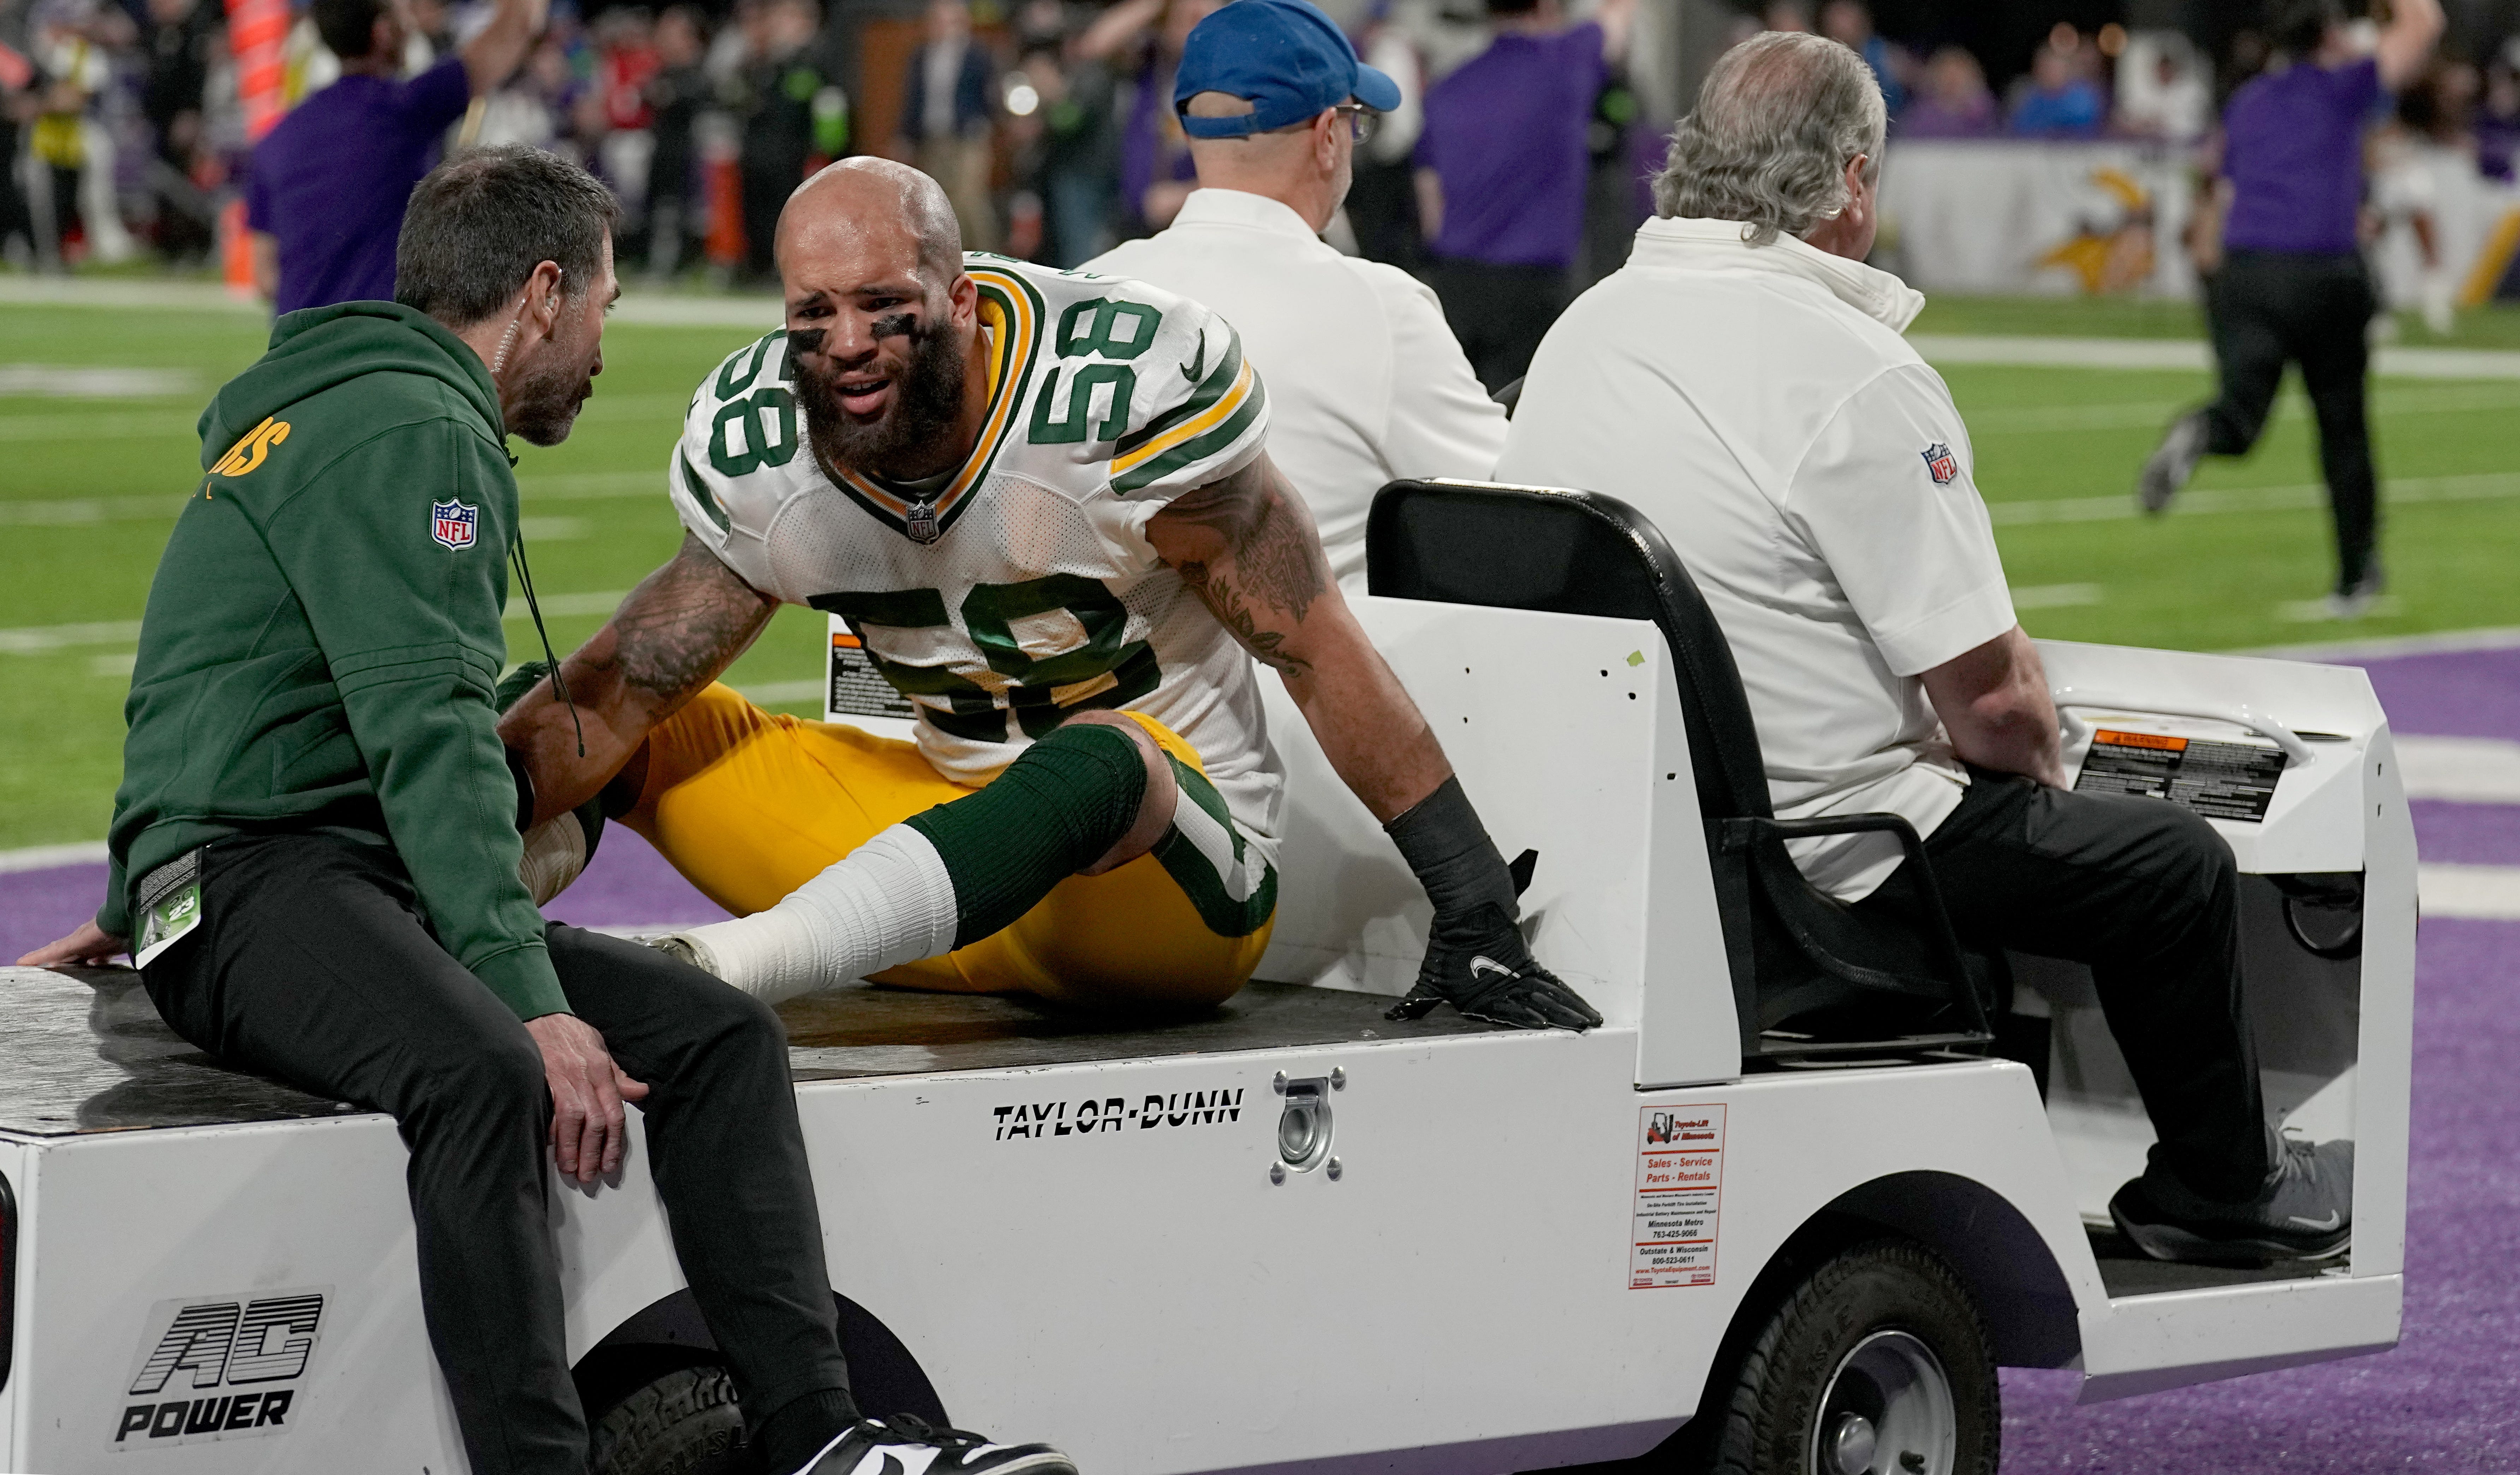 Green Bay Packers linebacker Isaiah McDuffie (58) is carted off the field after a possible concussion during the second quarter of their game Sunday, December 31, 2023 at U.S. Bank Stadium in Minneapolis, Minnesota. The Green Bay Packers beat the Minnesota Vikings 33-10.